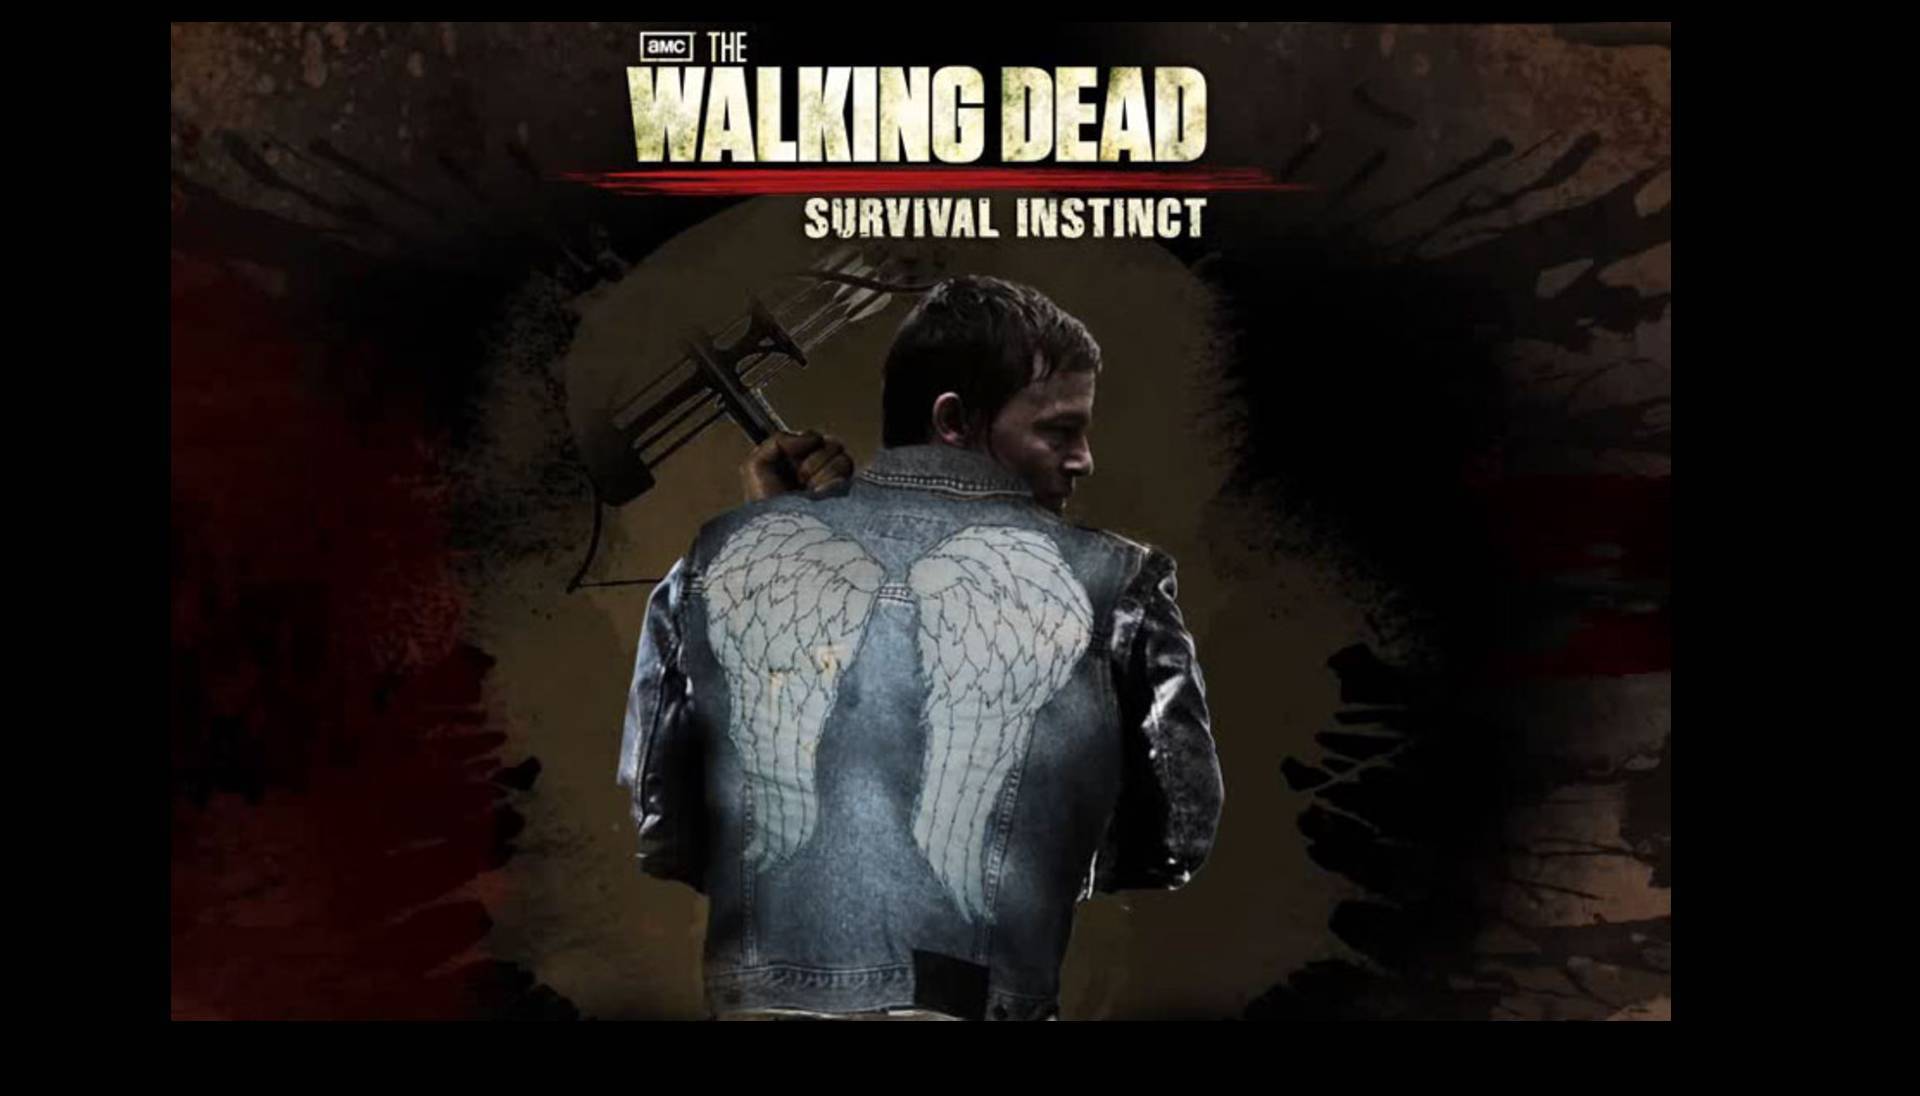 The Walking Dead Survival Instinct Cover (id: 66552)